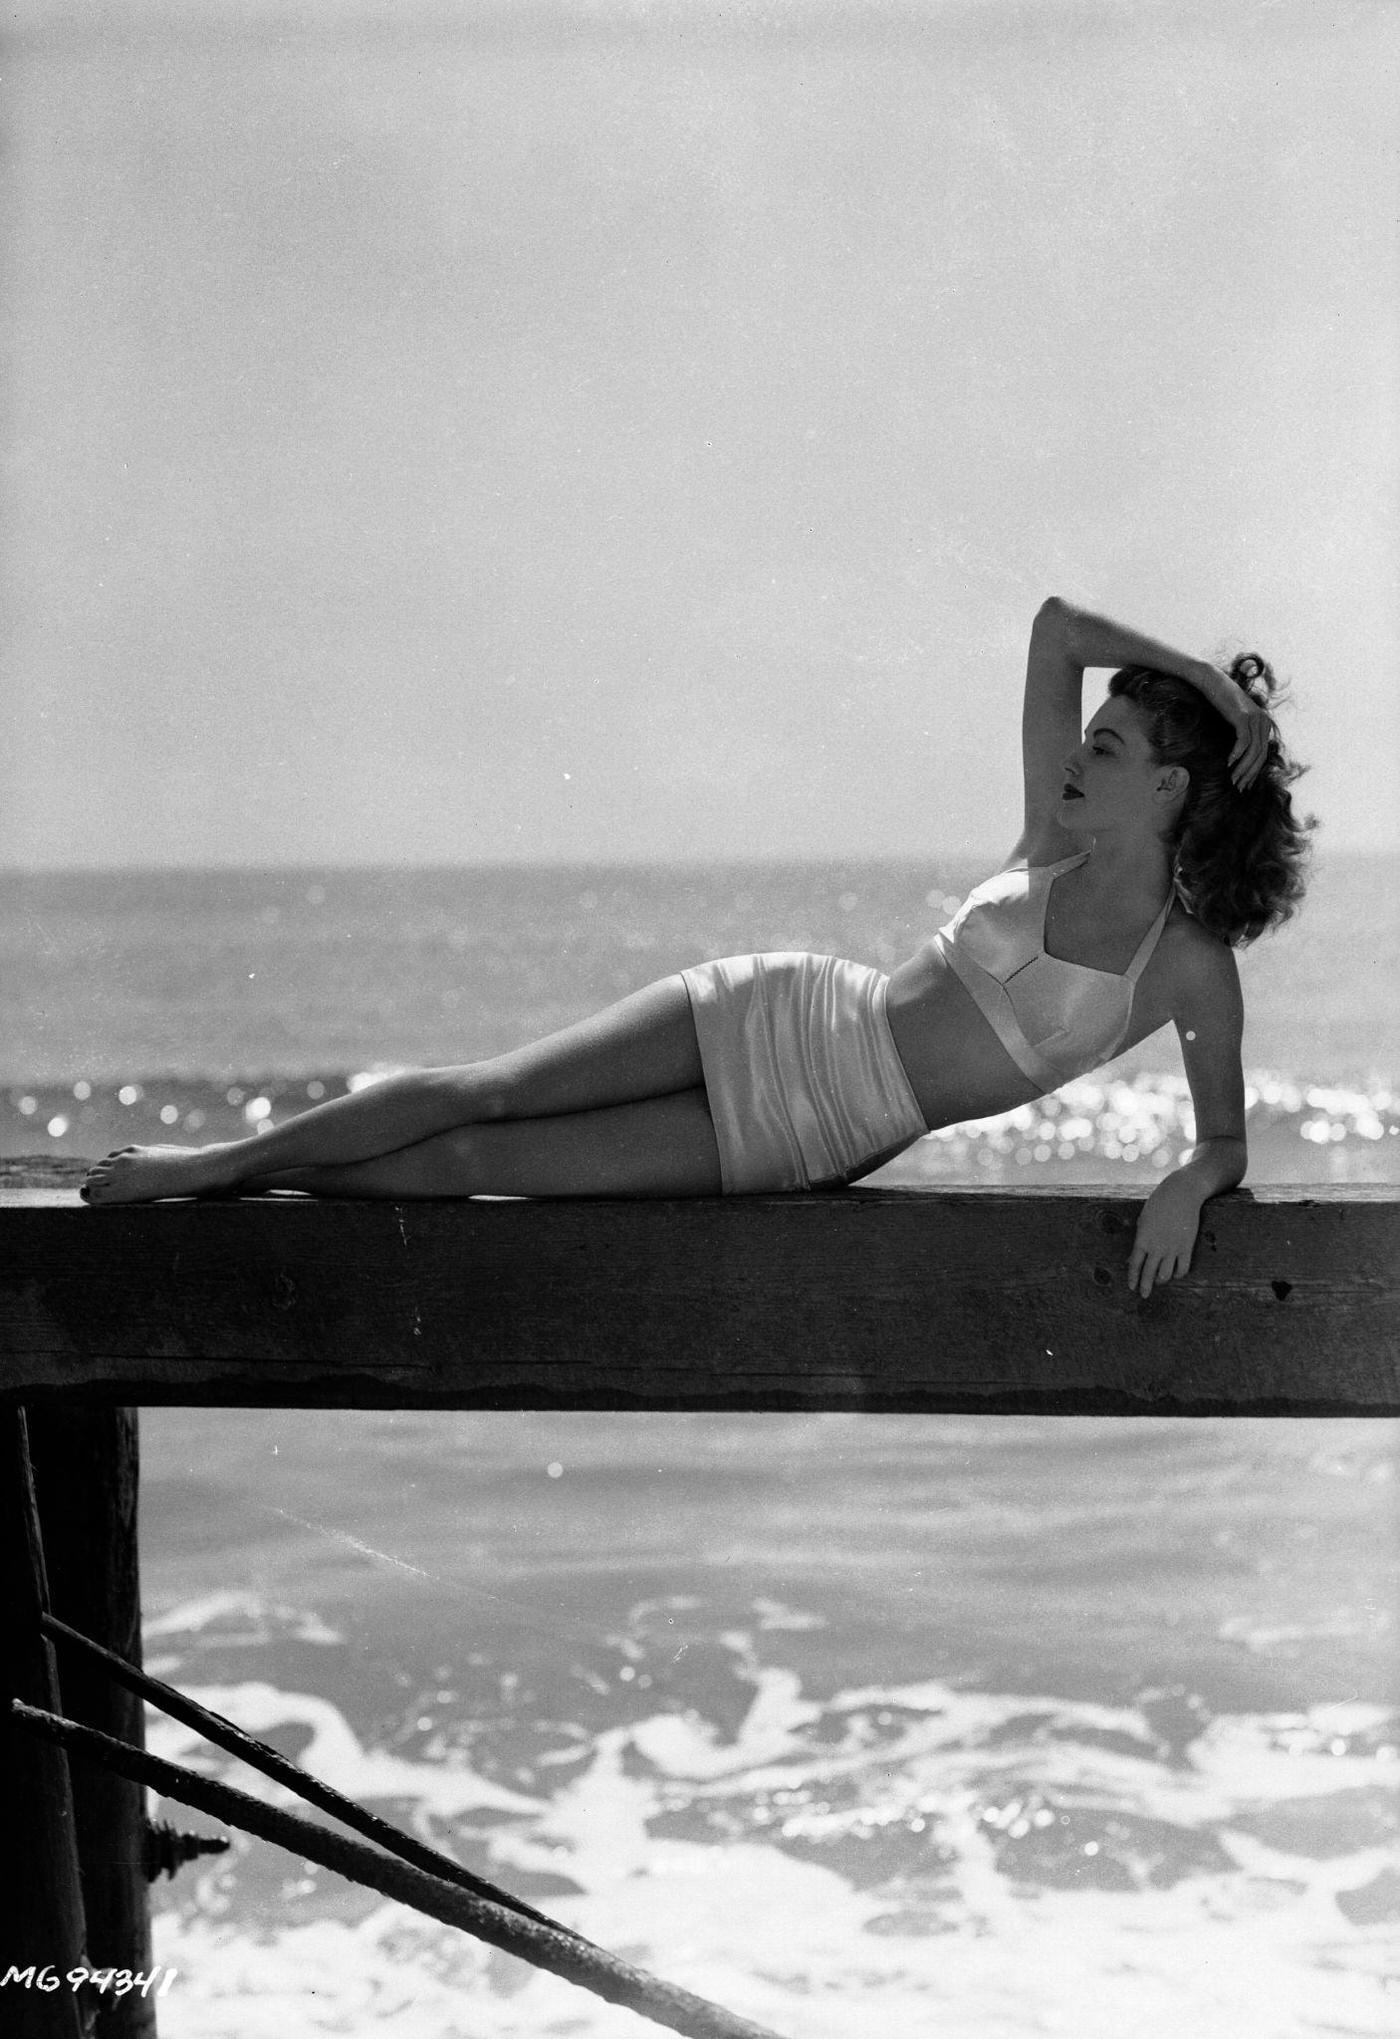 Actress Ava Gardner lounging on a wooden jetty in an elegant bikini, March 1943.